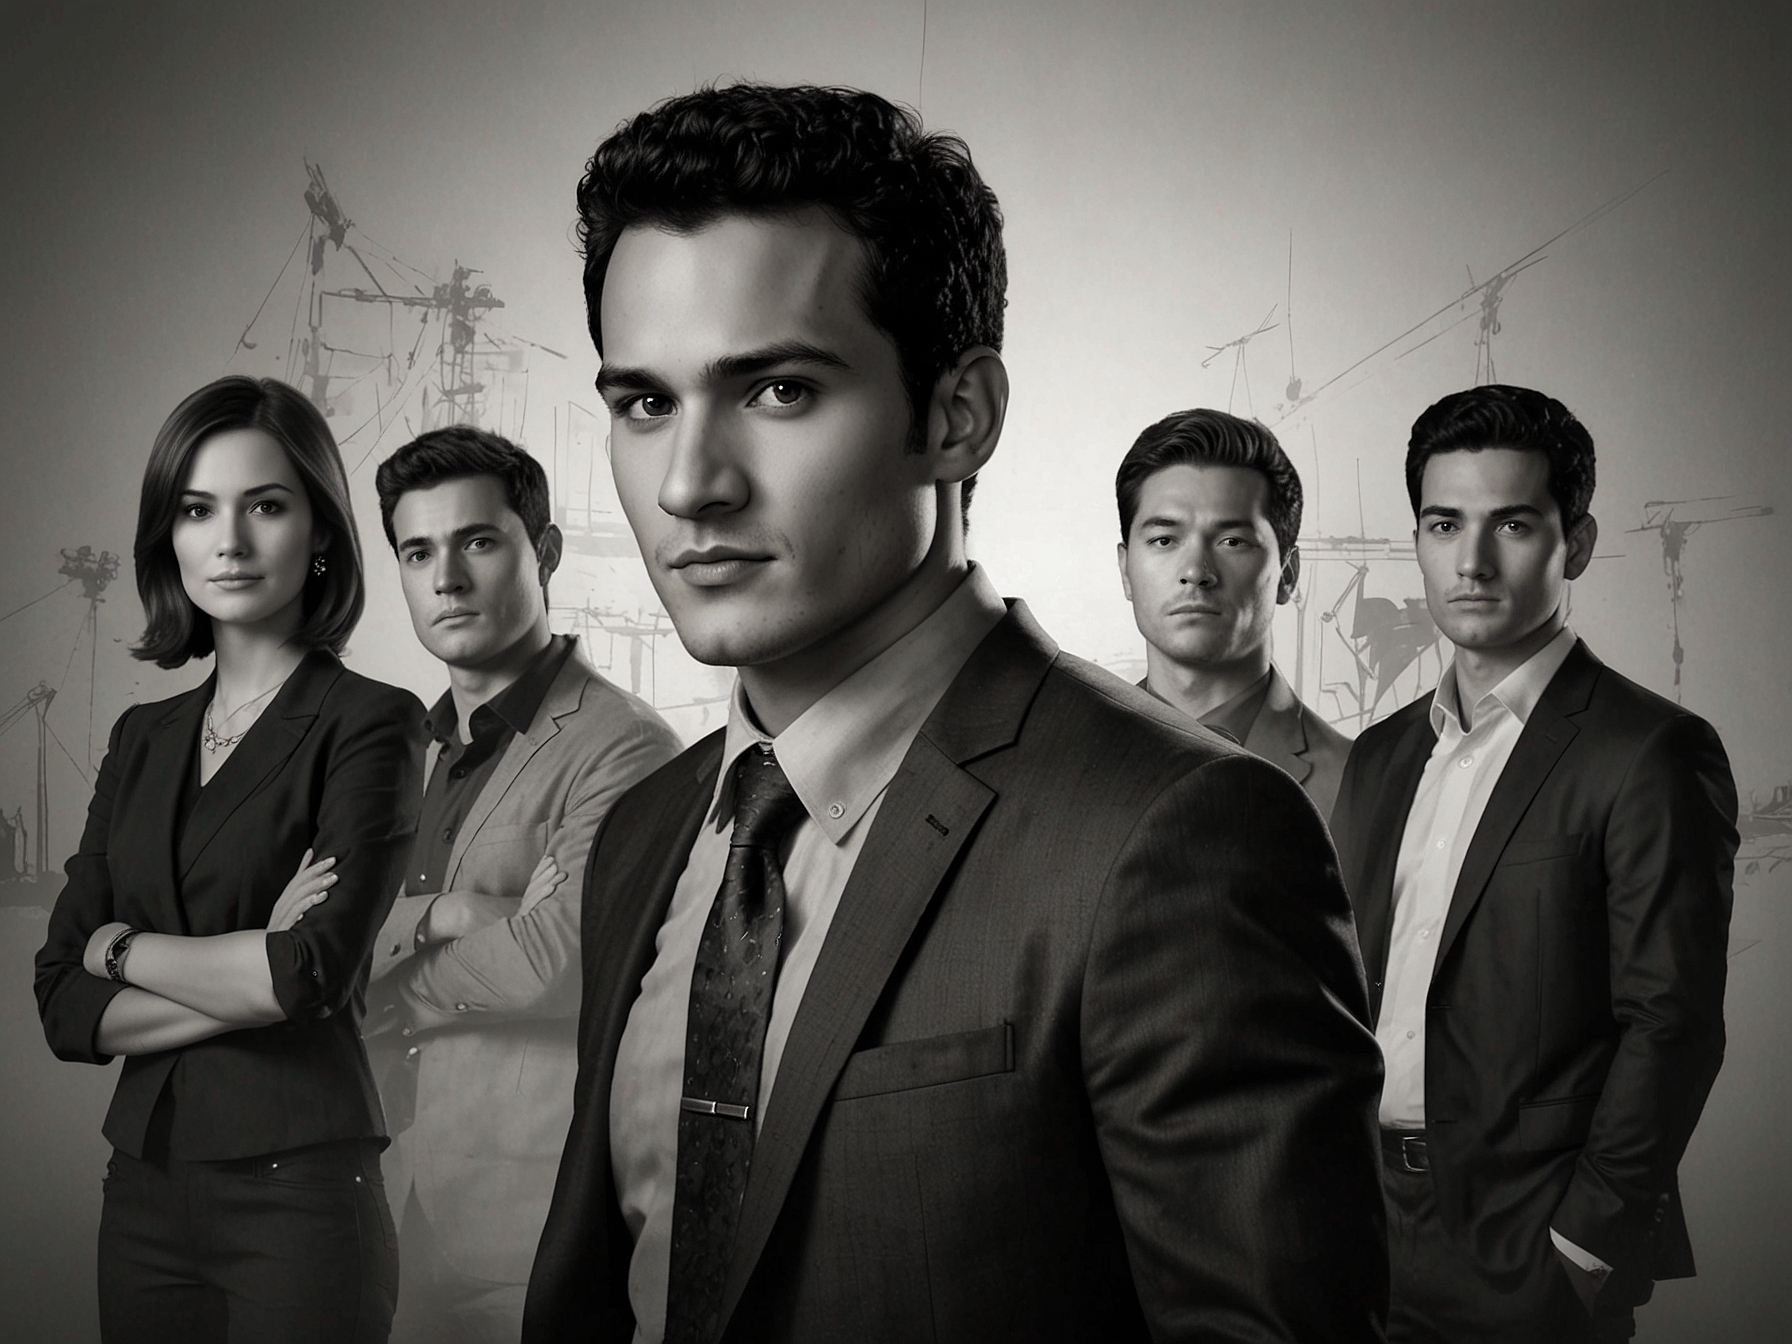 A promotional image of the TV series Scorpion (2014), featuring the main cast members, led by Walter O'Brien (Elyes Gabel), showcasing their unique skills and teamwork.